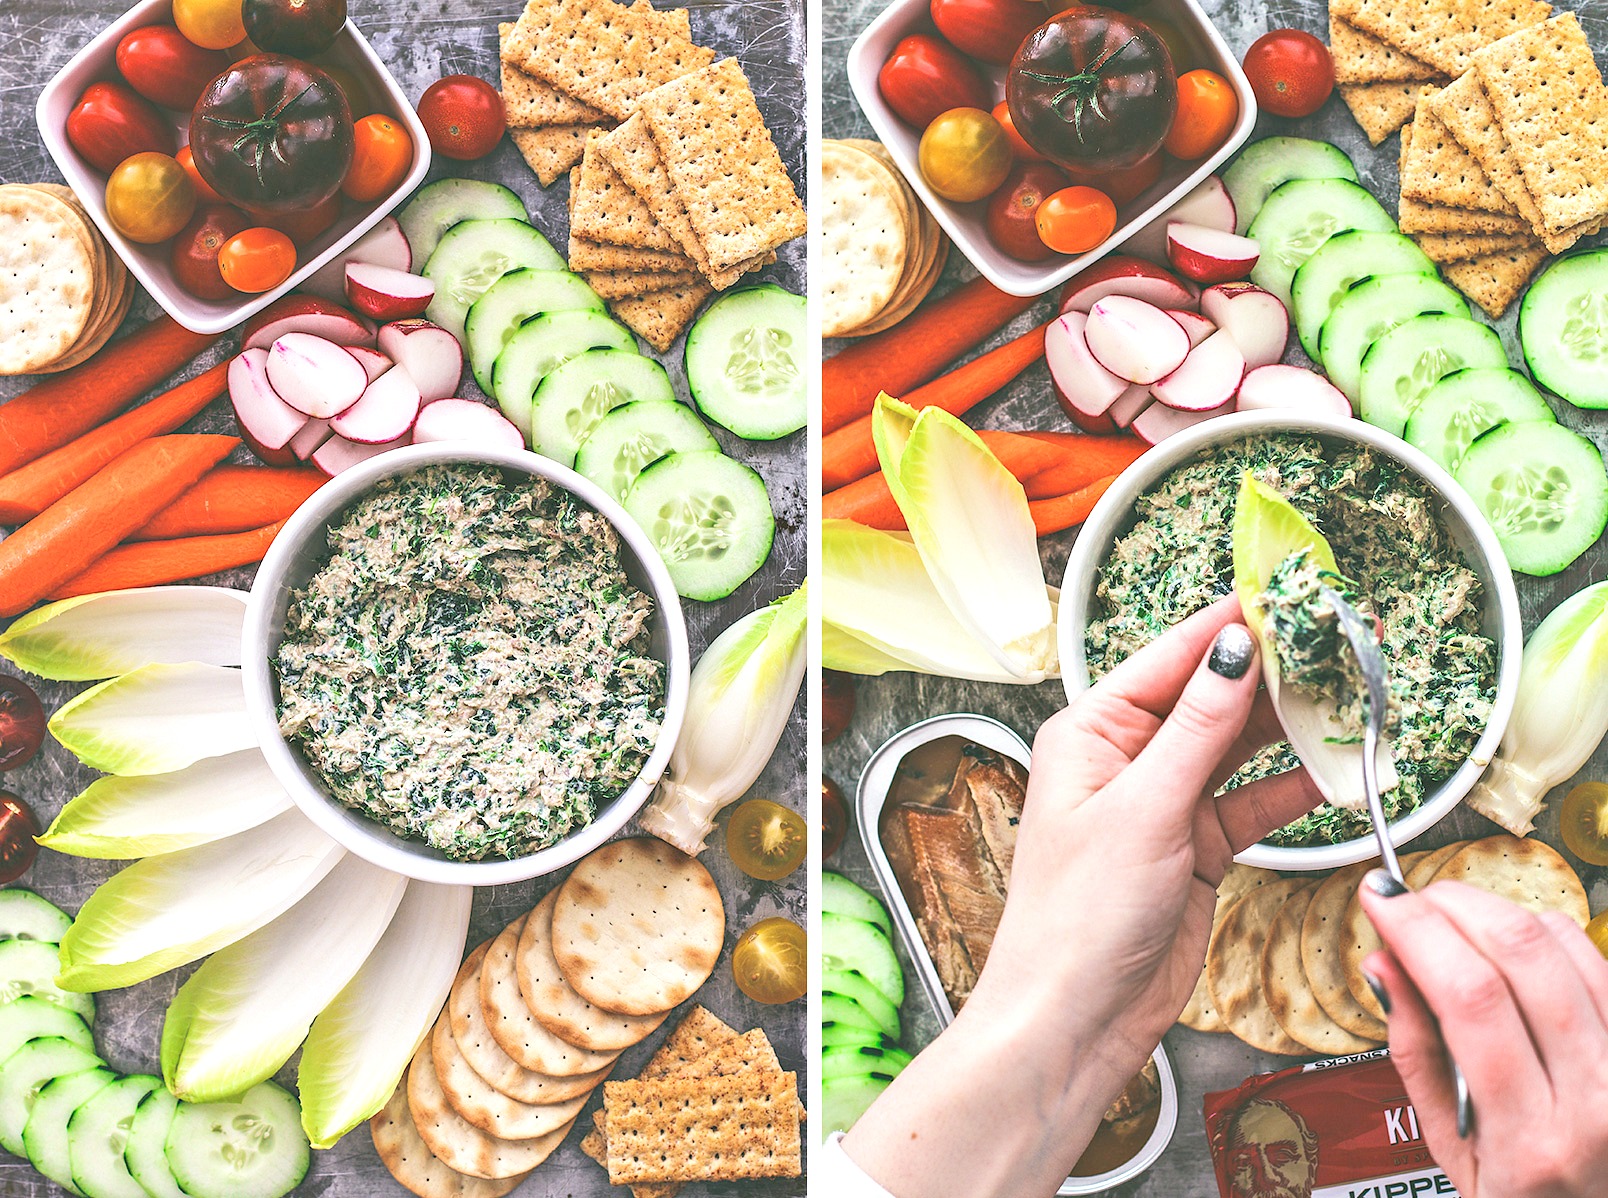 Smoked Fish Dip With Spinach | Killing Thyme